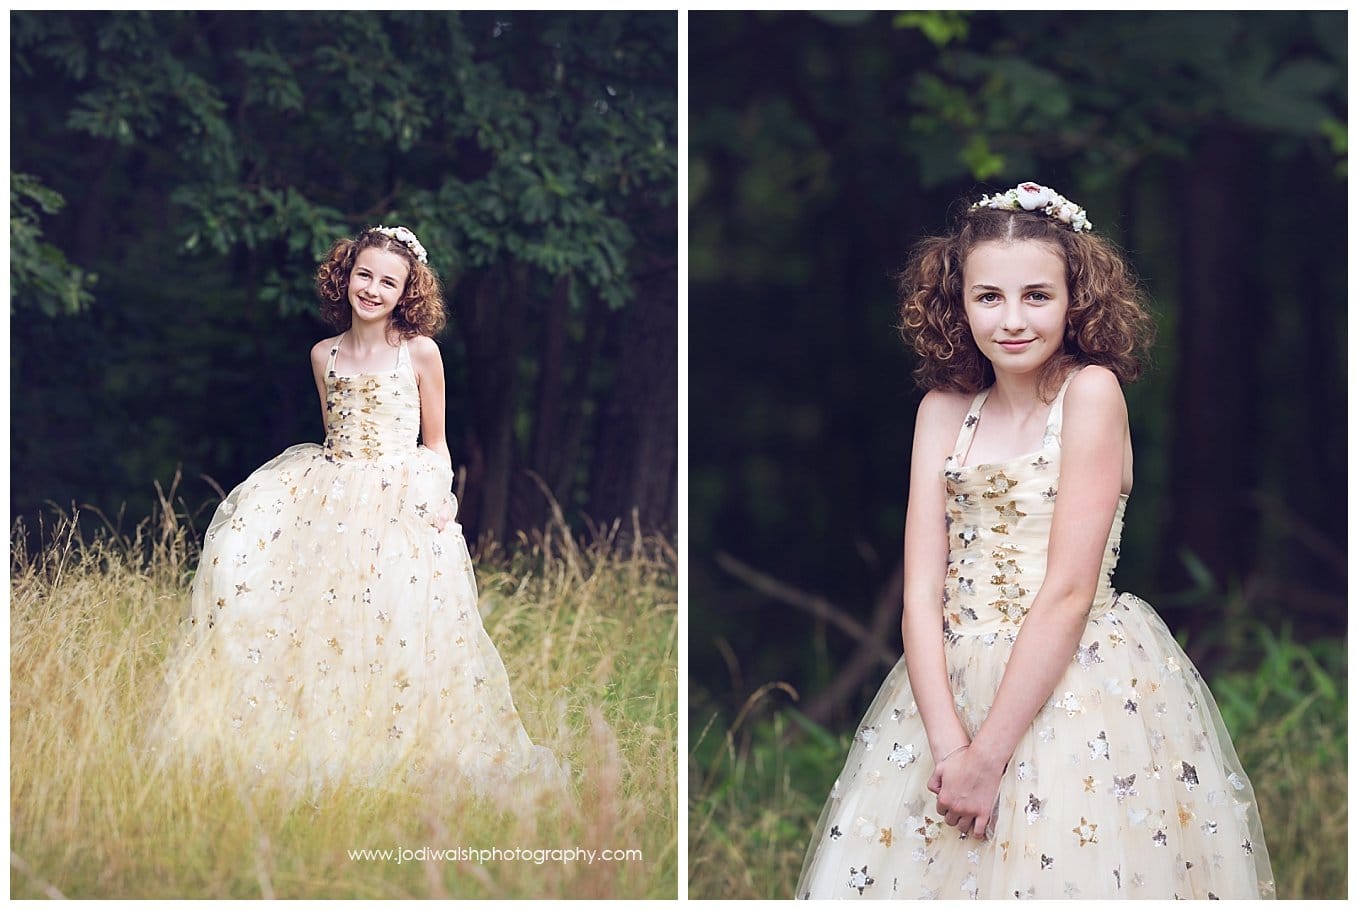 image of a tween girl with dark curly hair, wearing a princess dress and standing in the tall grass at the edge of a wood in North Park.